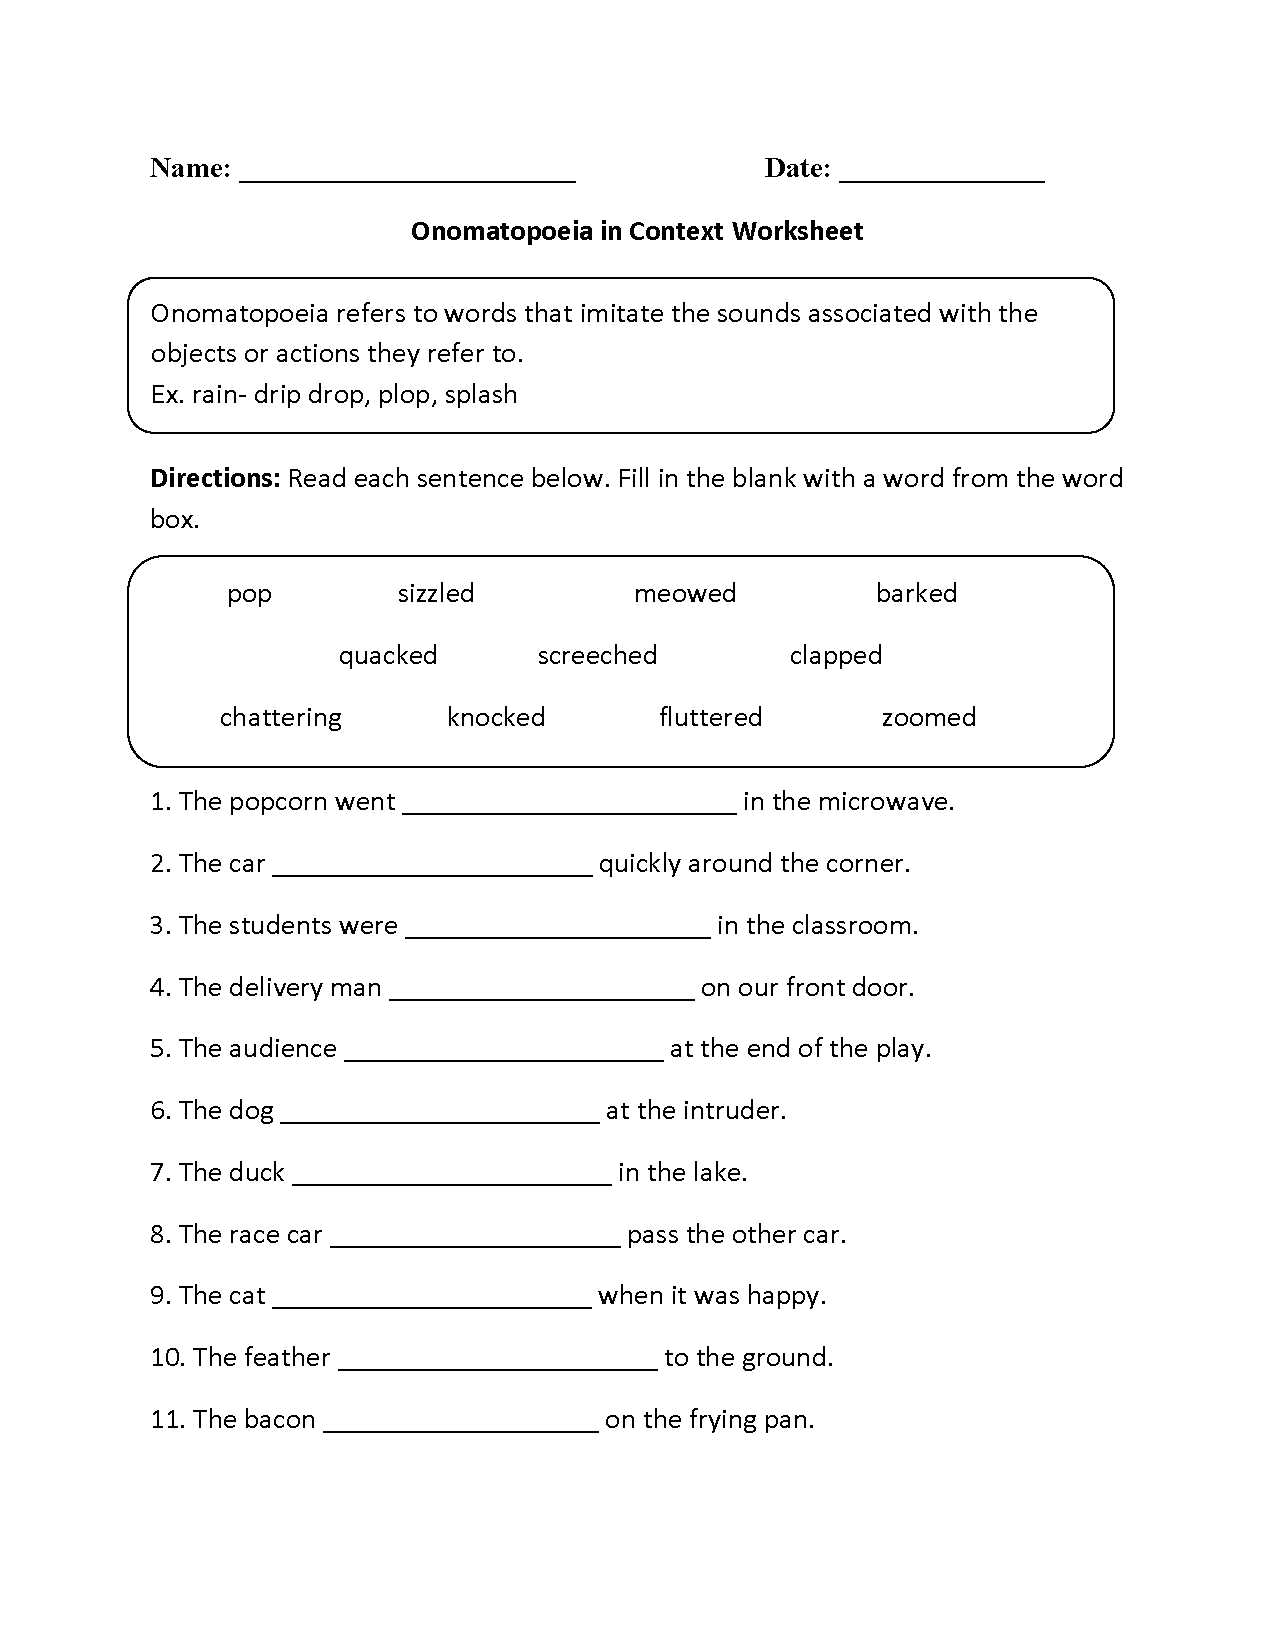 Square Root Worksheets 8th Grade Pdf Along with English Worksheets for Middle School the Best Worksheets Image